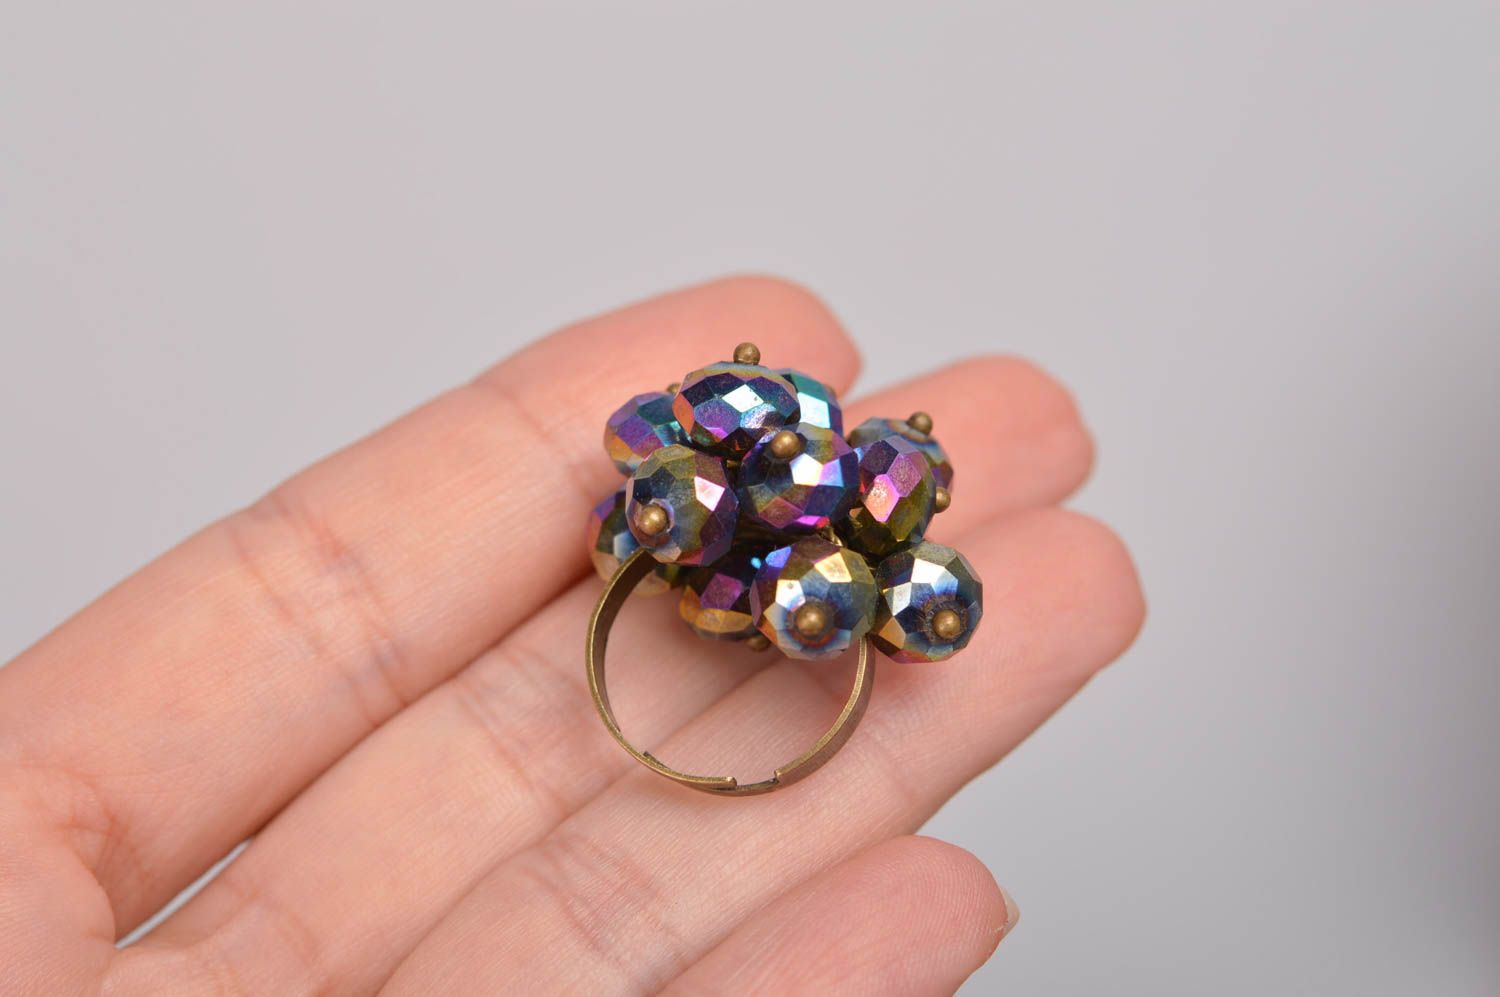 Beautiful handmade metal ring with glass beads jewelry trends gifts for her photo 2